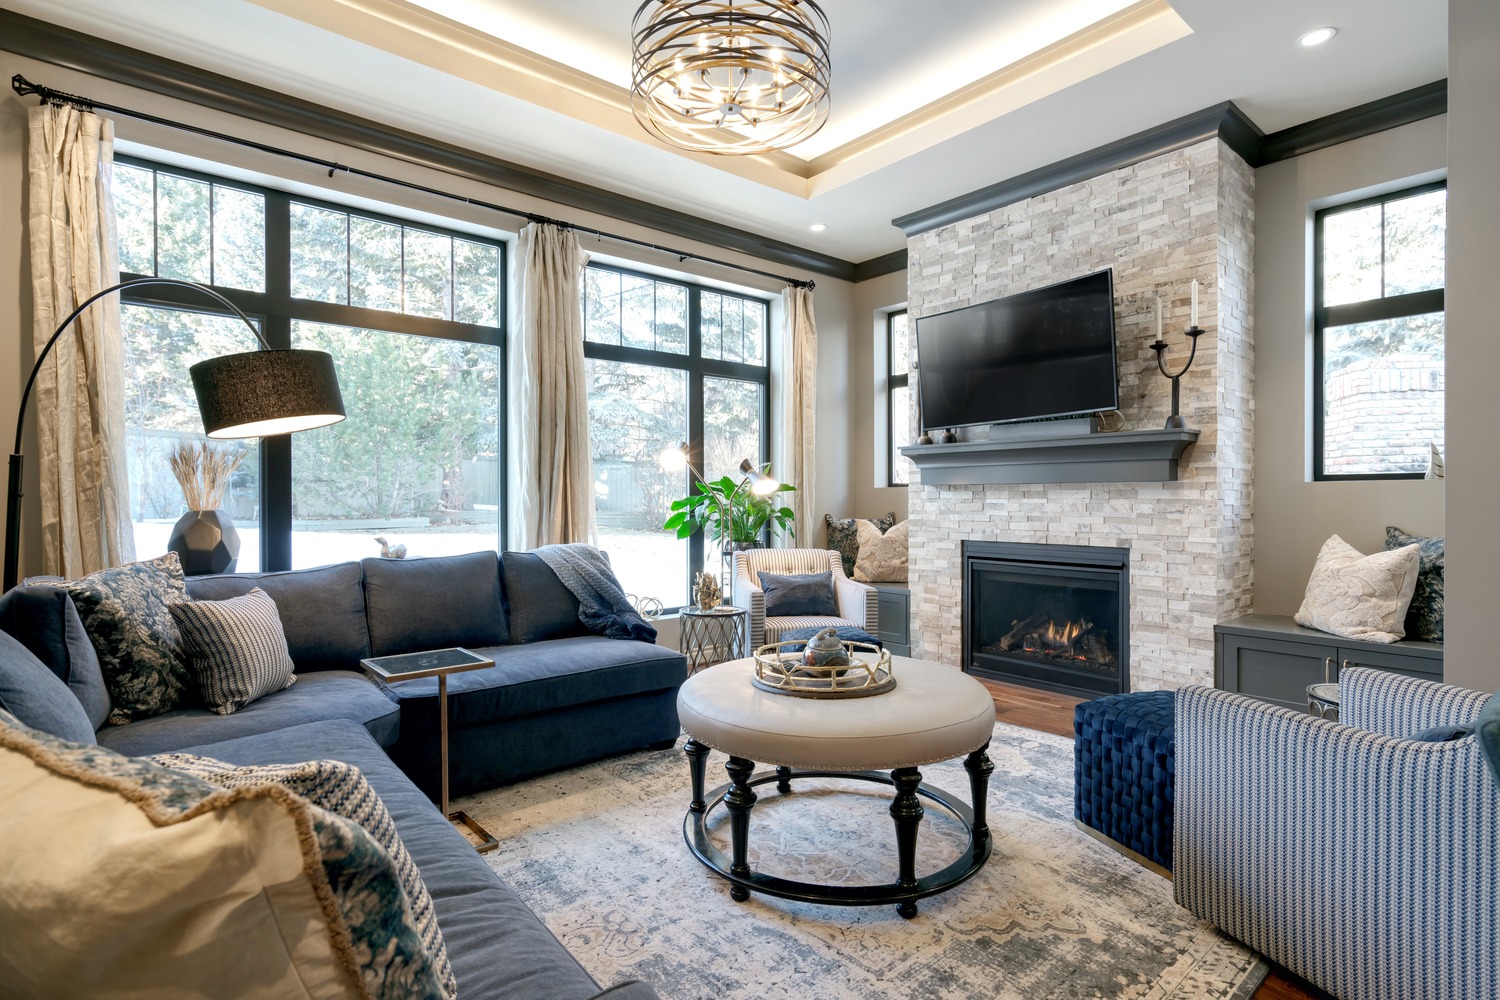 A luxuriously renovated sitting room created by a home addition, complete with stone fireplace and tray ceiling, by Melanson Homes.